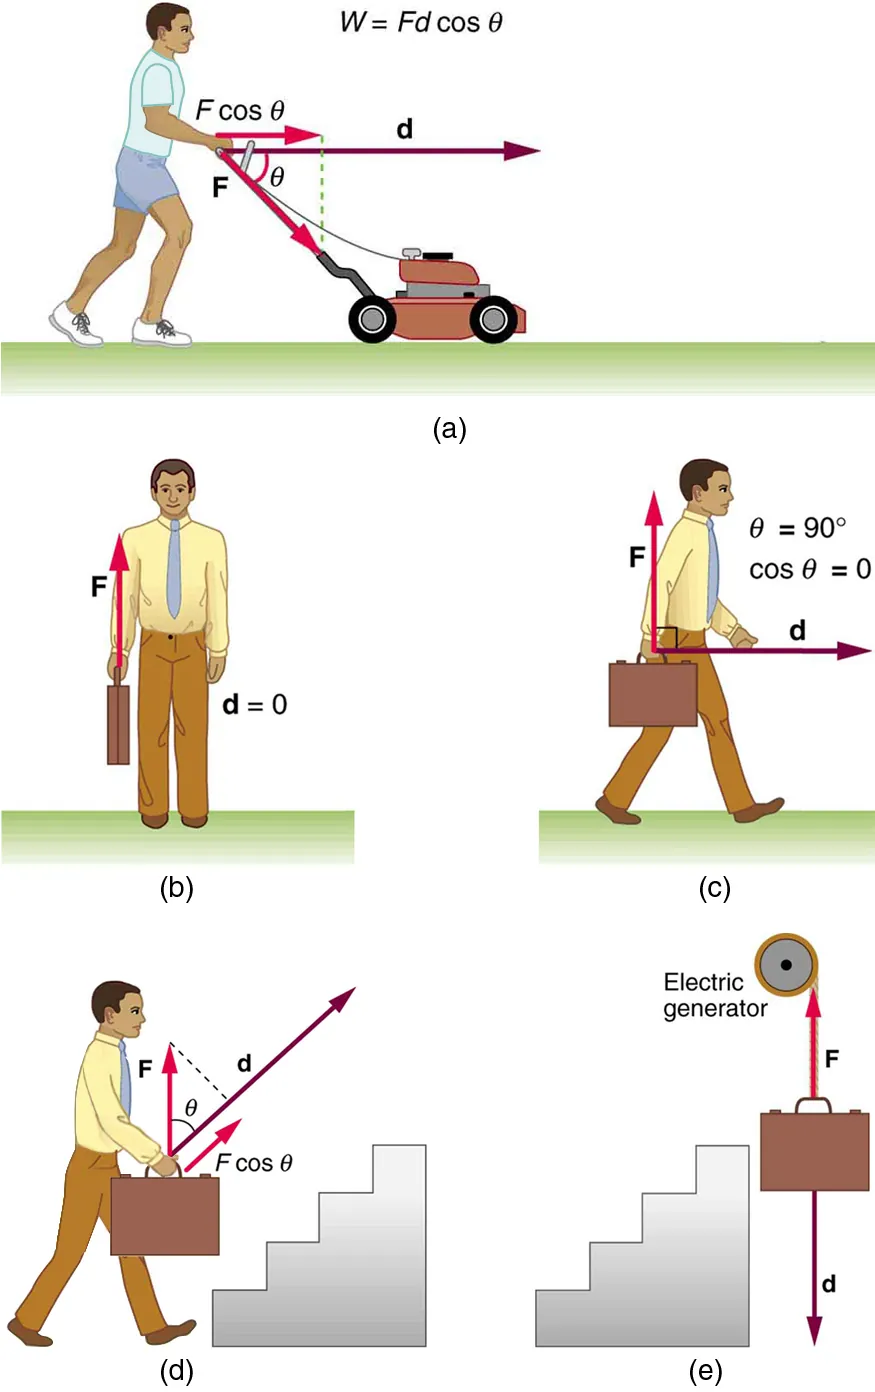 Five drawings labeled a through e. In (a), person pushing a lawn mower with a force F. Force is represented by a vector making an angle theta with the horizontal and displacement of the mower is represented by vector d. The component of vector F along vector d is F cosine theta. Work done by the person W is equal to F d cosine theta. (b) A person is standing with a briefcase in his hand. The force F shown by a vector arrow pointing upwards starting from the handle of briefcase and the displacement d is equal to zero. (c) A person is walking holding the briefcase in his hand. Force vector F is in the vertical direction starting from the handle of briefcase and displacement vector d is in horizontal direction starting from the same point as vector F. The angle between F and d theta is equal to 90 degrees. Cosine theta is equal to zero. (d) A briefcase is shown in front of a set of stairs. A vector d starting from the first stair points along the incline of the stair and a force vector F is in vertical direction starting from the same point as vector d. The angle between them is theta. A component of vector F along vector d is F d cosine theta. (e) A briefcase is shown lowered vertically down from an electric generator. The displacement vector d points downwards and force vector F points upwards acting on the briefcase.